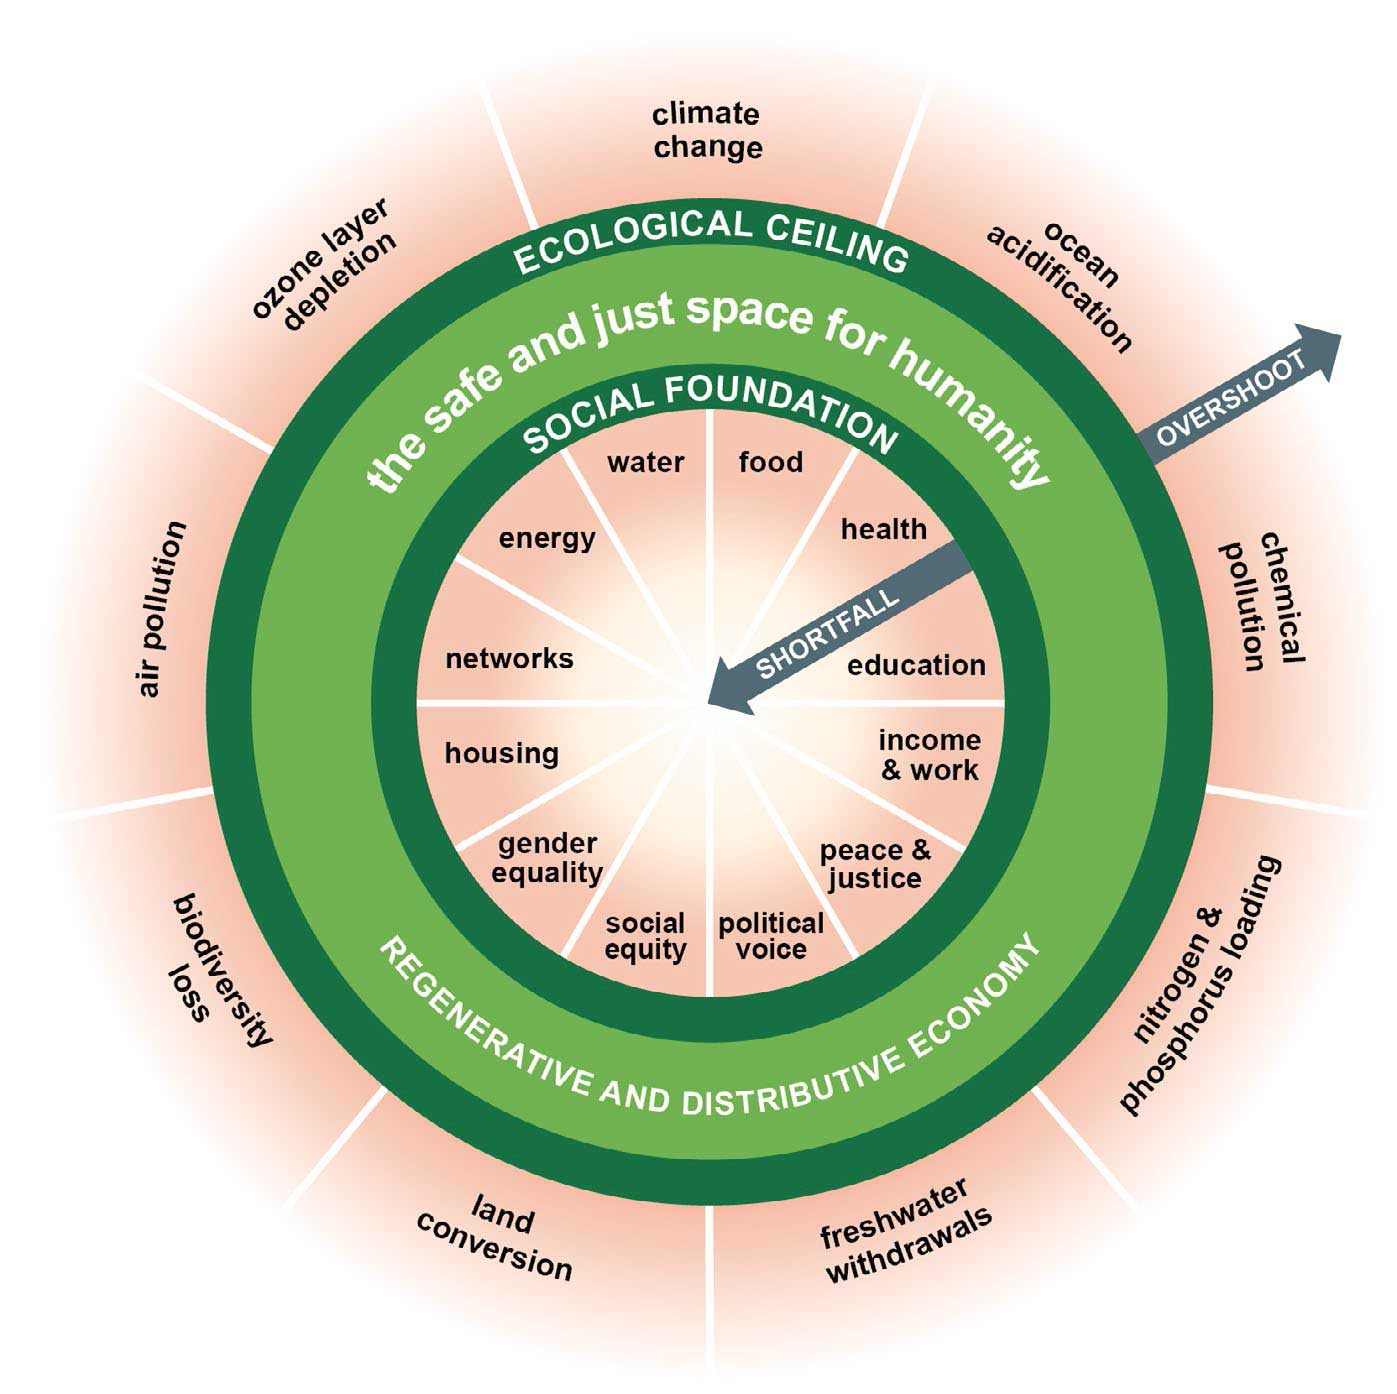 The Doughnut Economics framework, which aims to ensure the basic needs of all people are met while not exceeding the earth’s environmental capacity, can be used to help guide decisions on when new construction is needed.